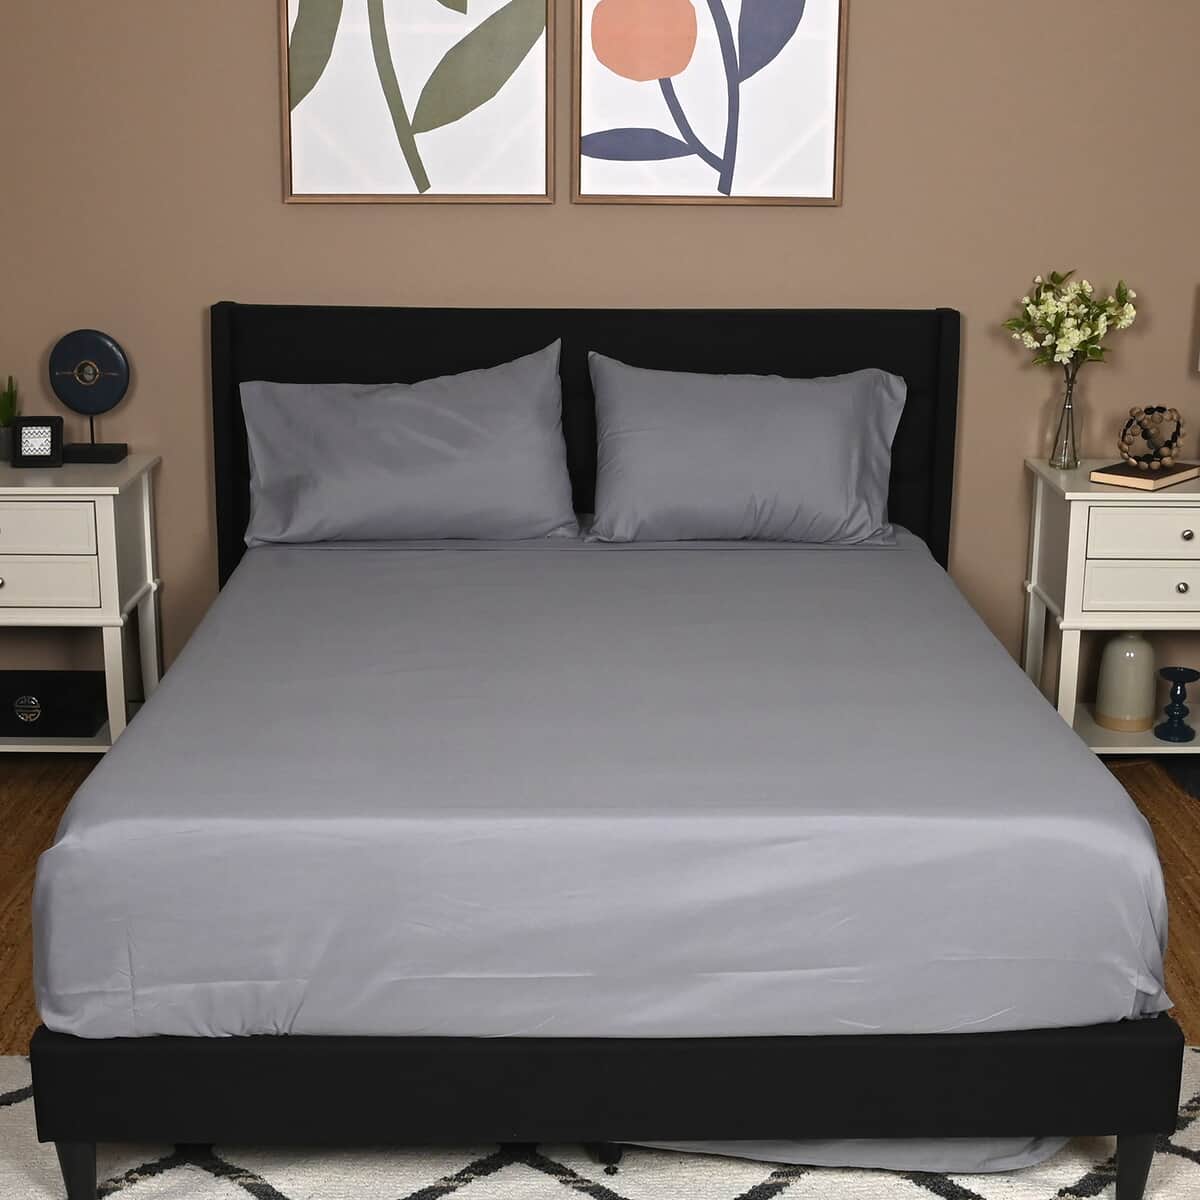 Closeout VCNY Lincoln Black, White Reversible 7pc Bed in a Bag Comforter Set Includes Sheet Set - Full image number 2